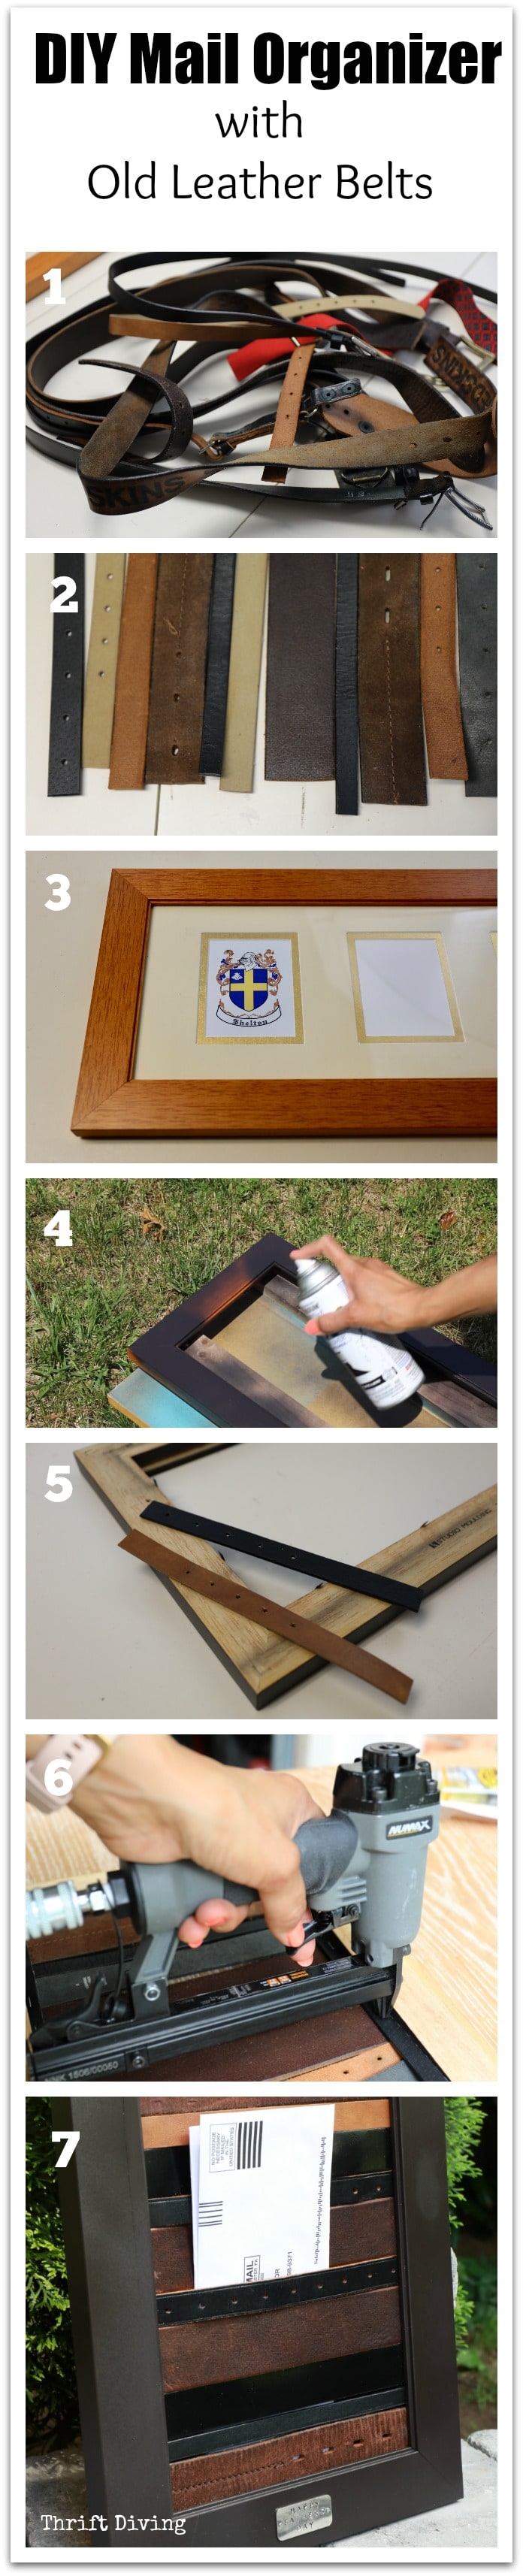 DIY Mail Organizer with Repurposed Old Leather Belts: Father's Day Gift Idea 